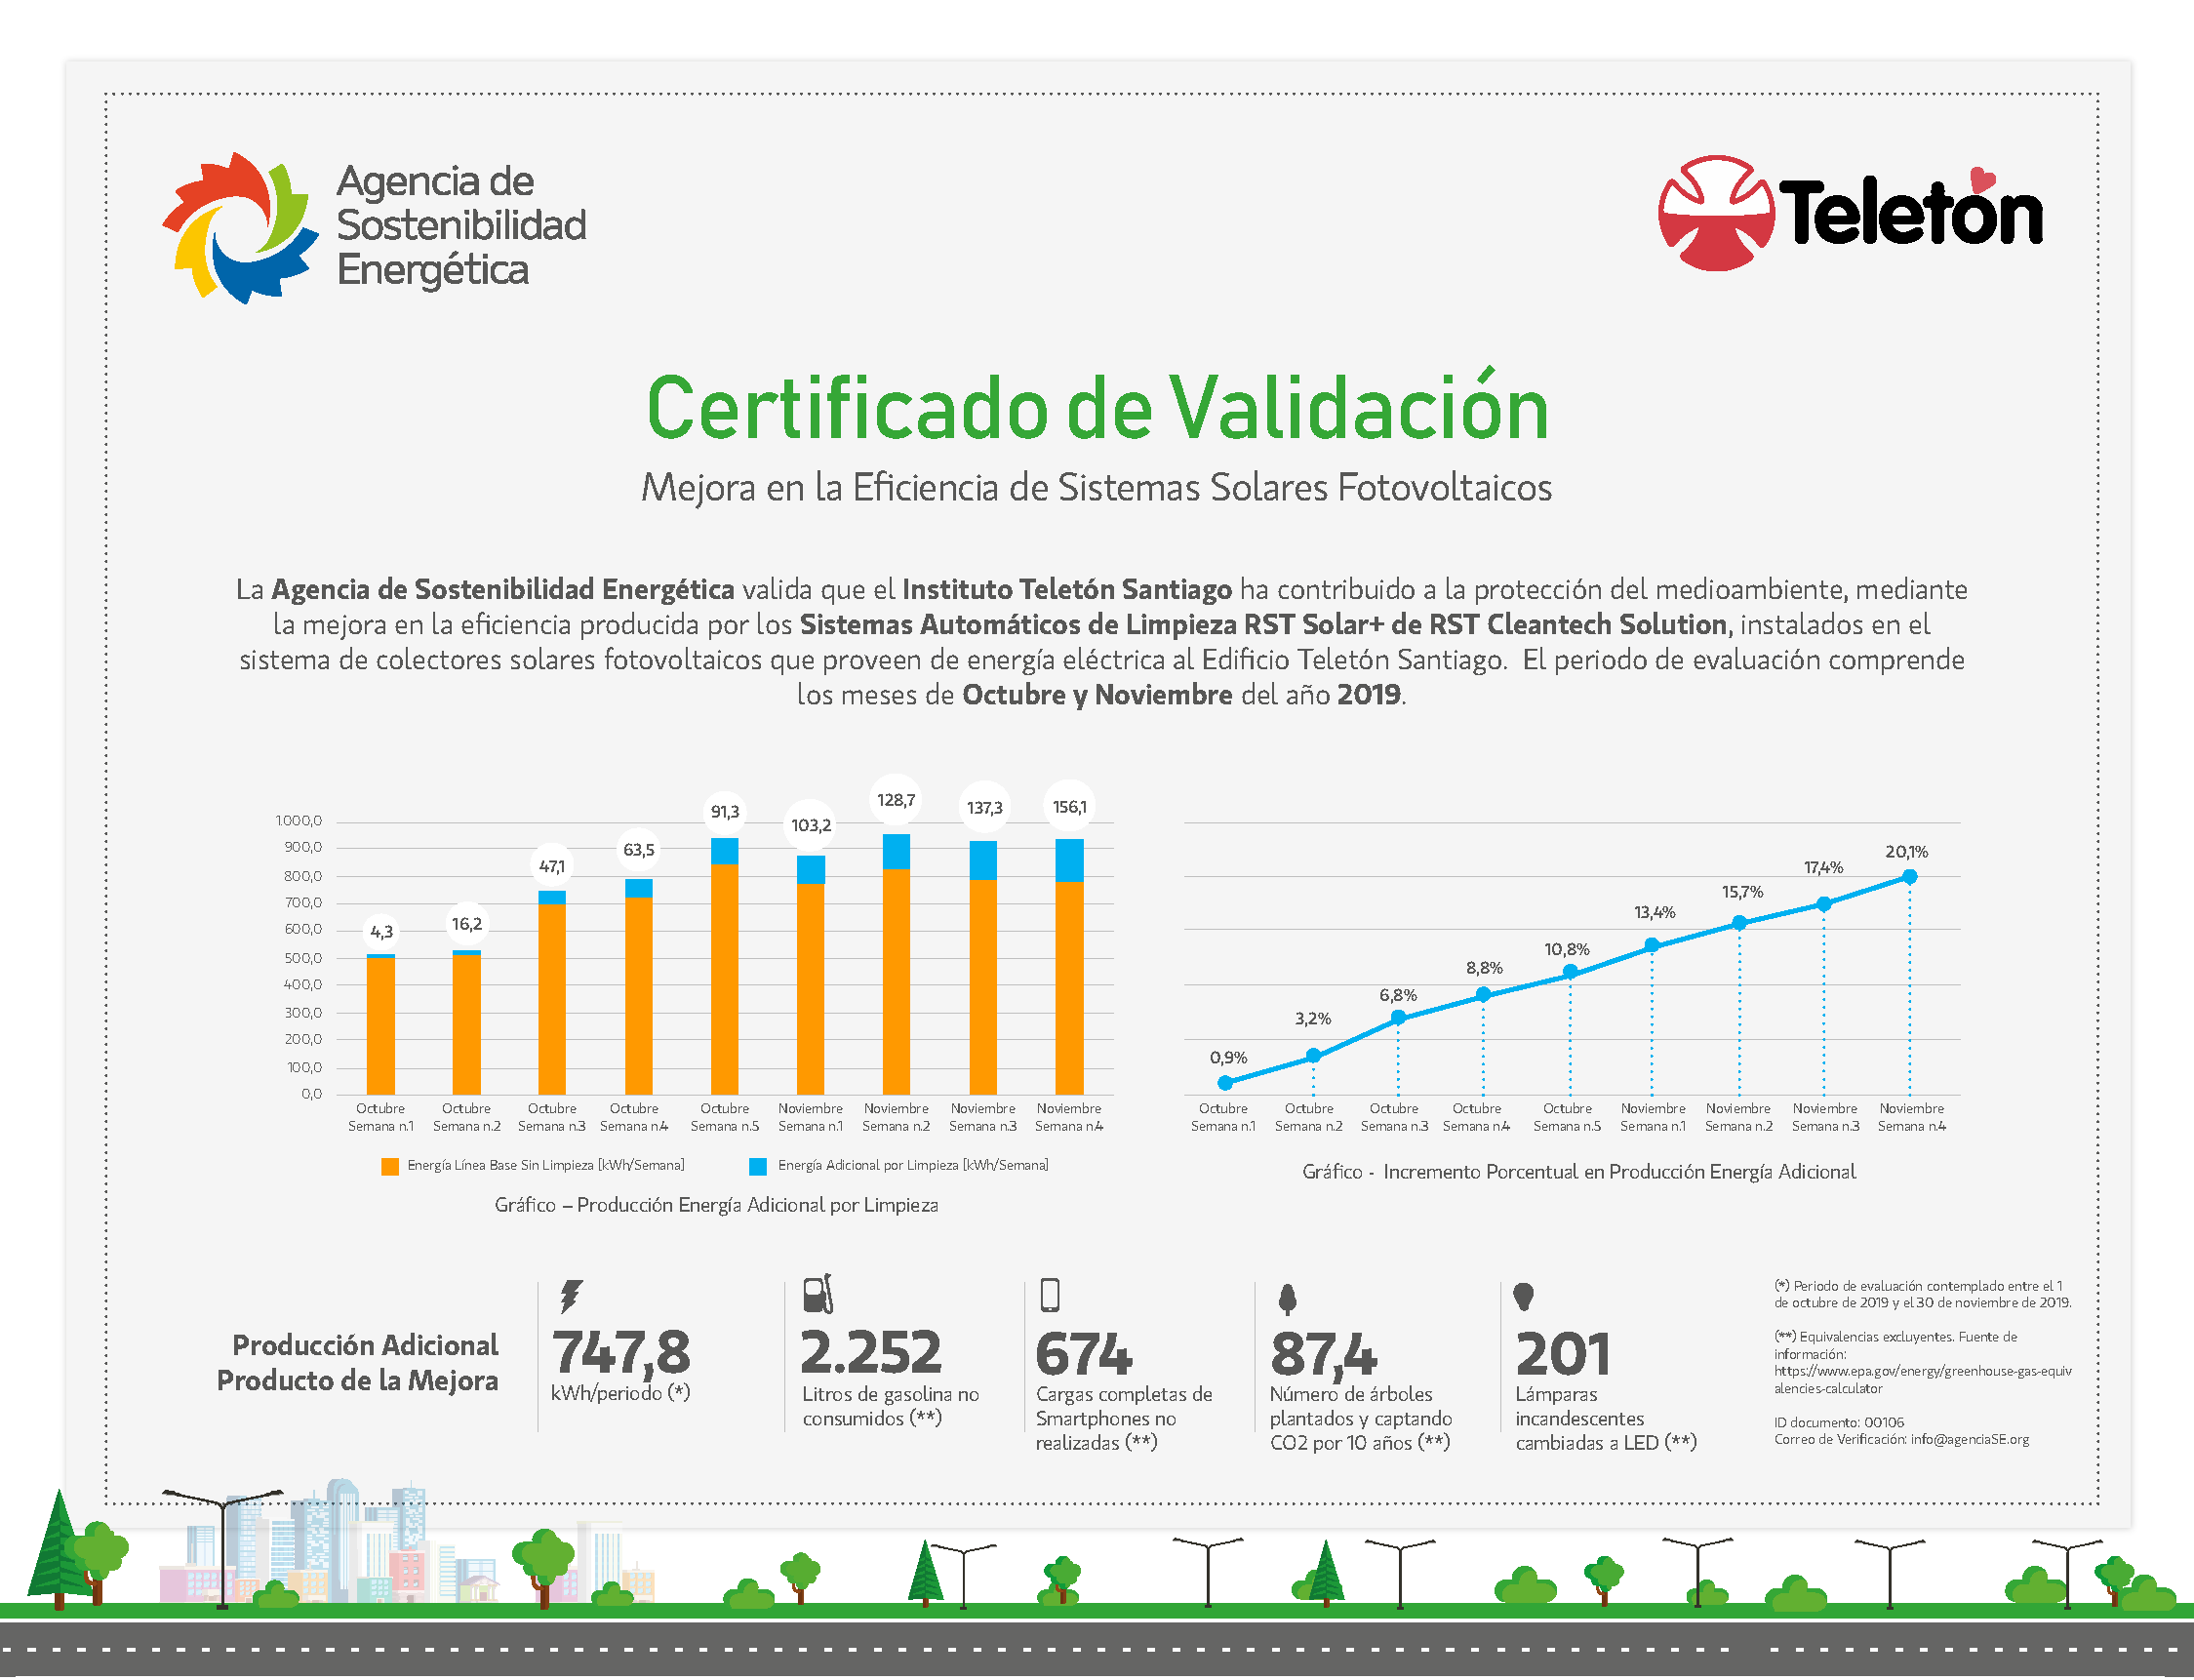 RST CleanTech received a certification from the Agency of Sustainable Energy, Chile. The certificate recognizes that – over a 9-week period – the RST system achieved over 20% production increase compared to non-rst panels.